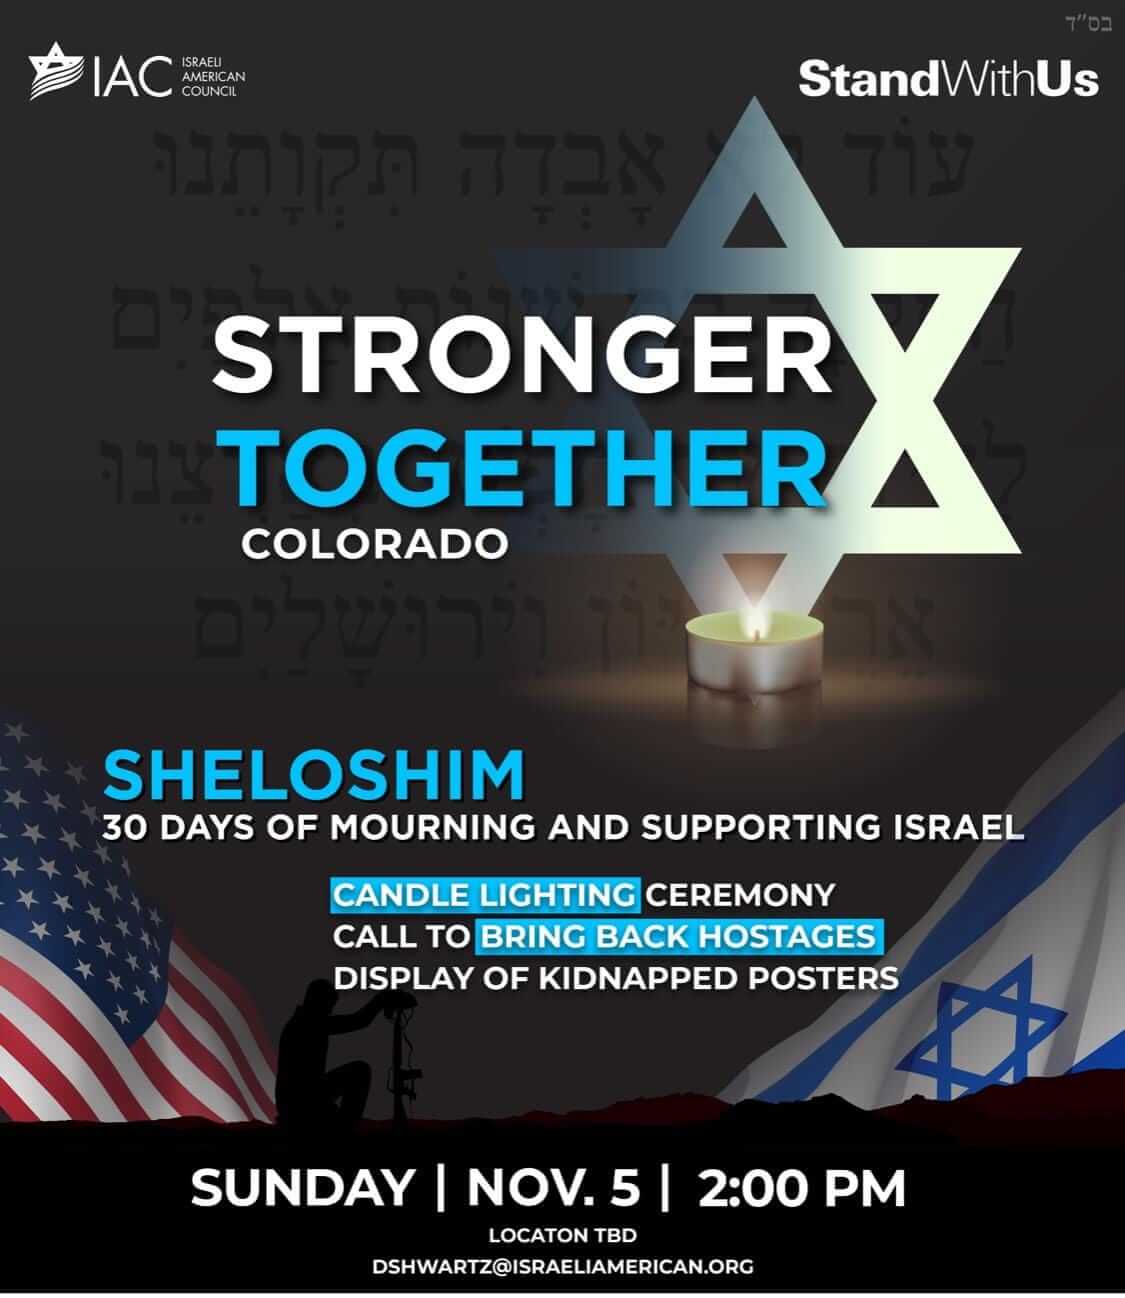 IAC and StandWithUs Stronger Together event